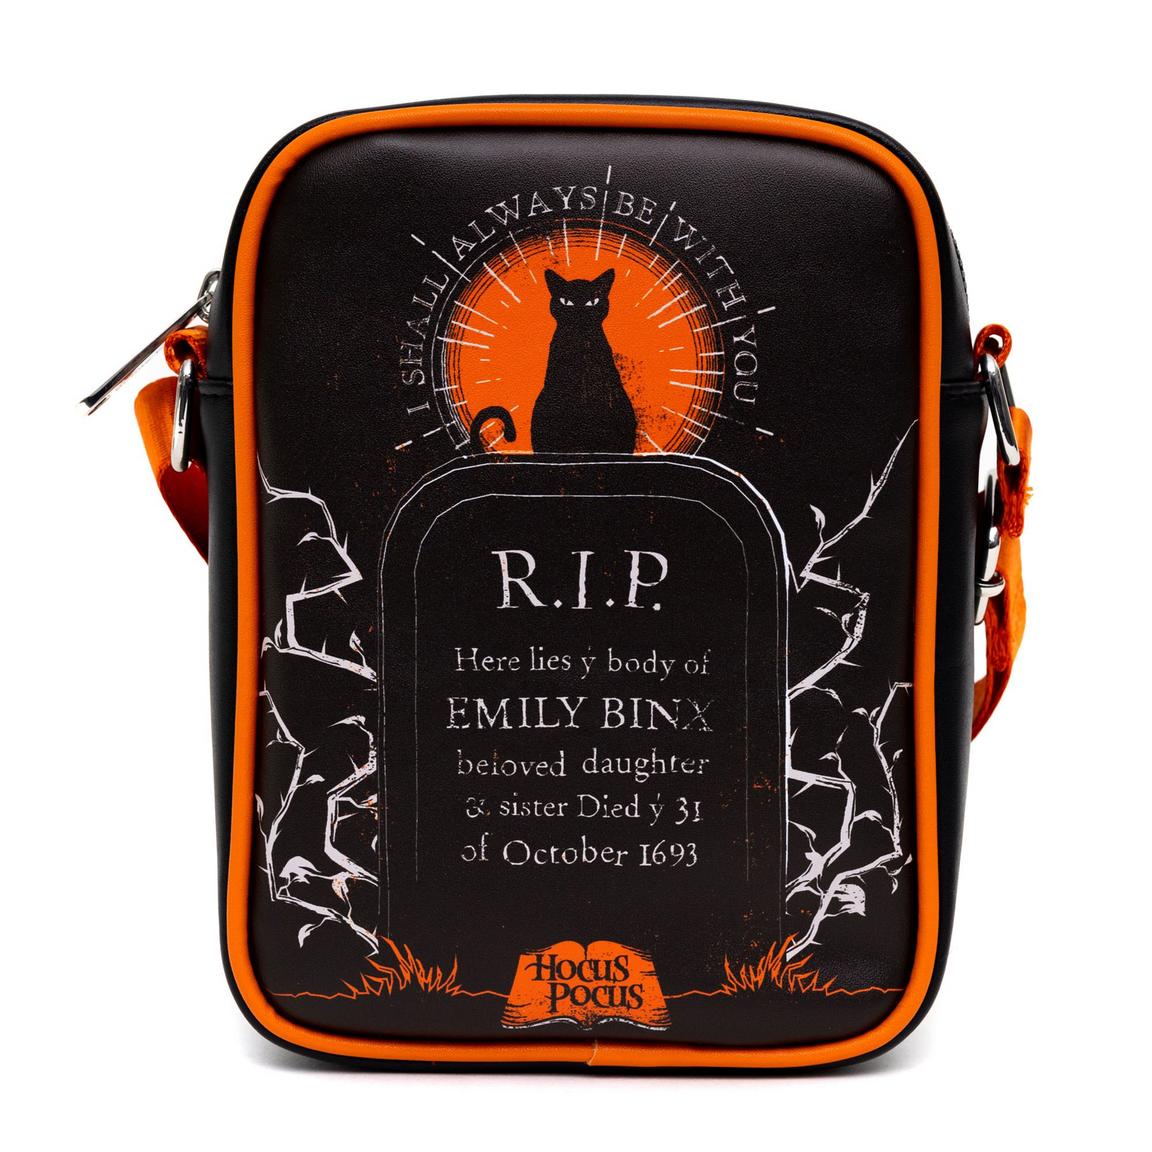 Buckle-Down Disney Hocus Pocus Polyurethane Crossbody Bag with Piping Edge and Cell Phone Pocket, Size: One Size, Buckle Down